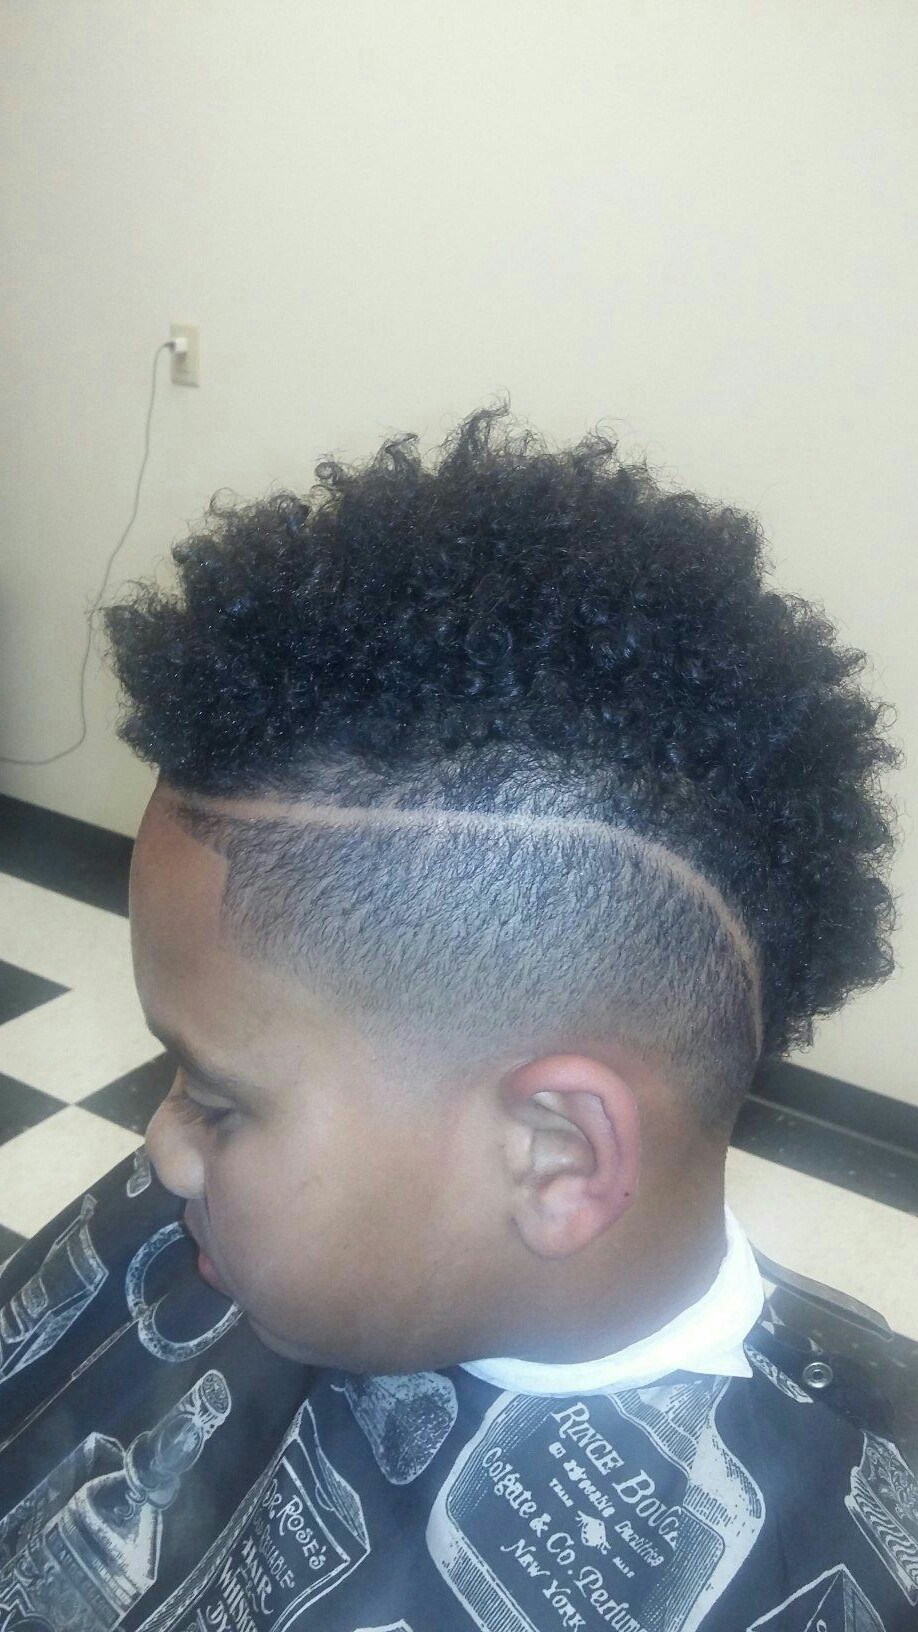 Extraordinary Barber and Beauty Shop 33 3rd St SE Suite 101, Barberton Ohio 44203